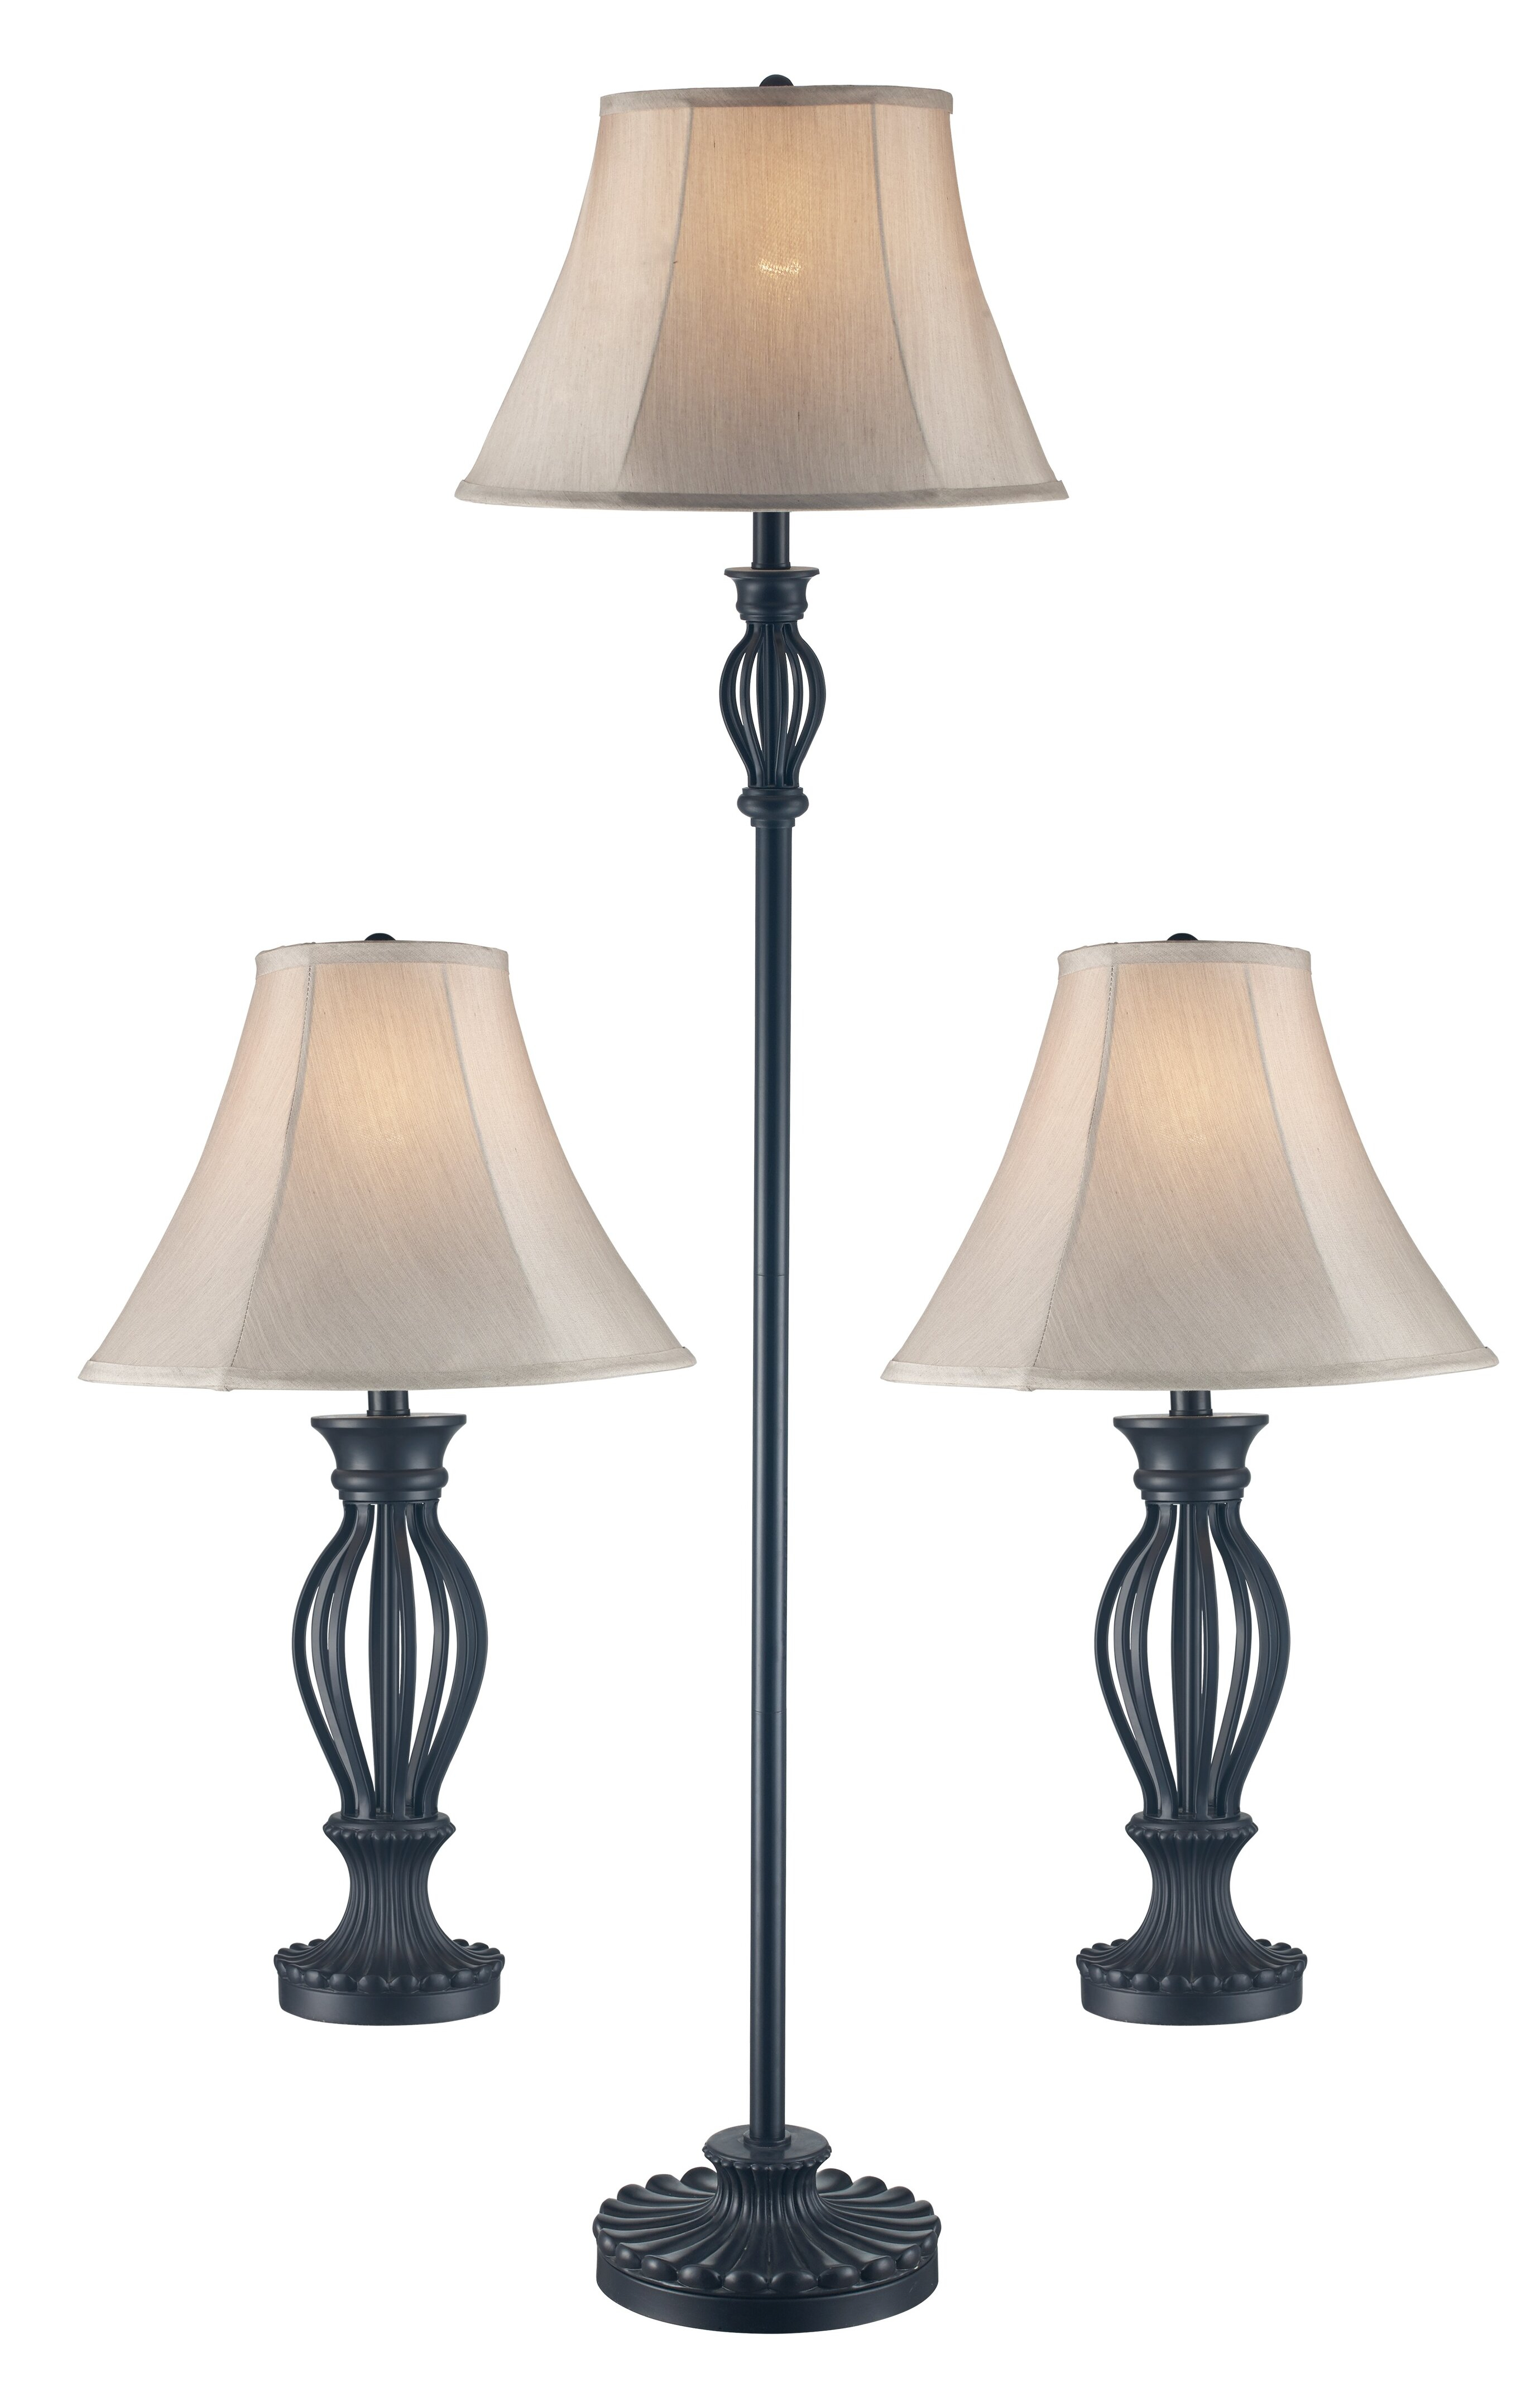 Gambier 3 Piece Table And Floor Lamp Set in size 2759 X 4285